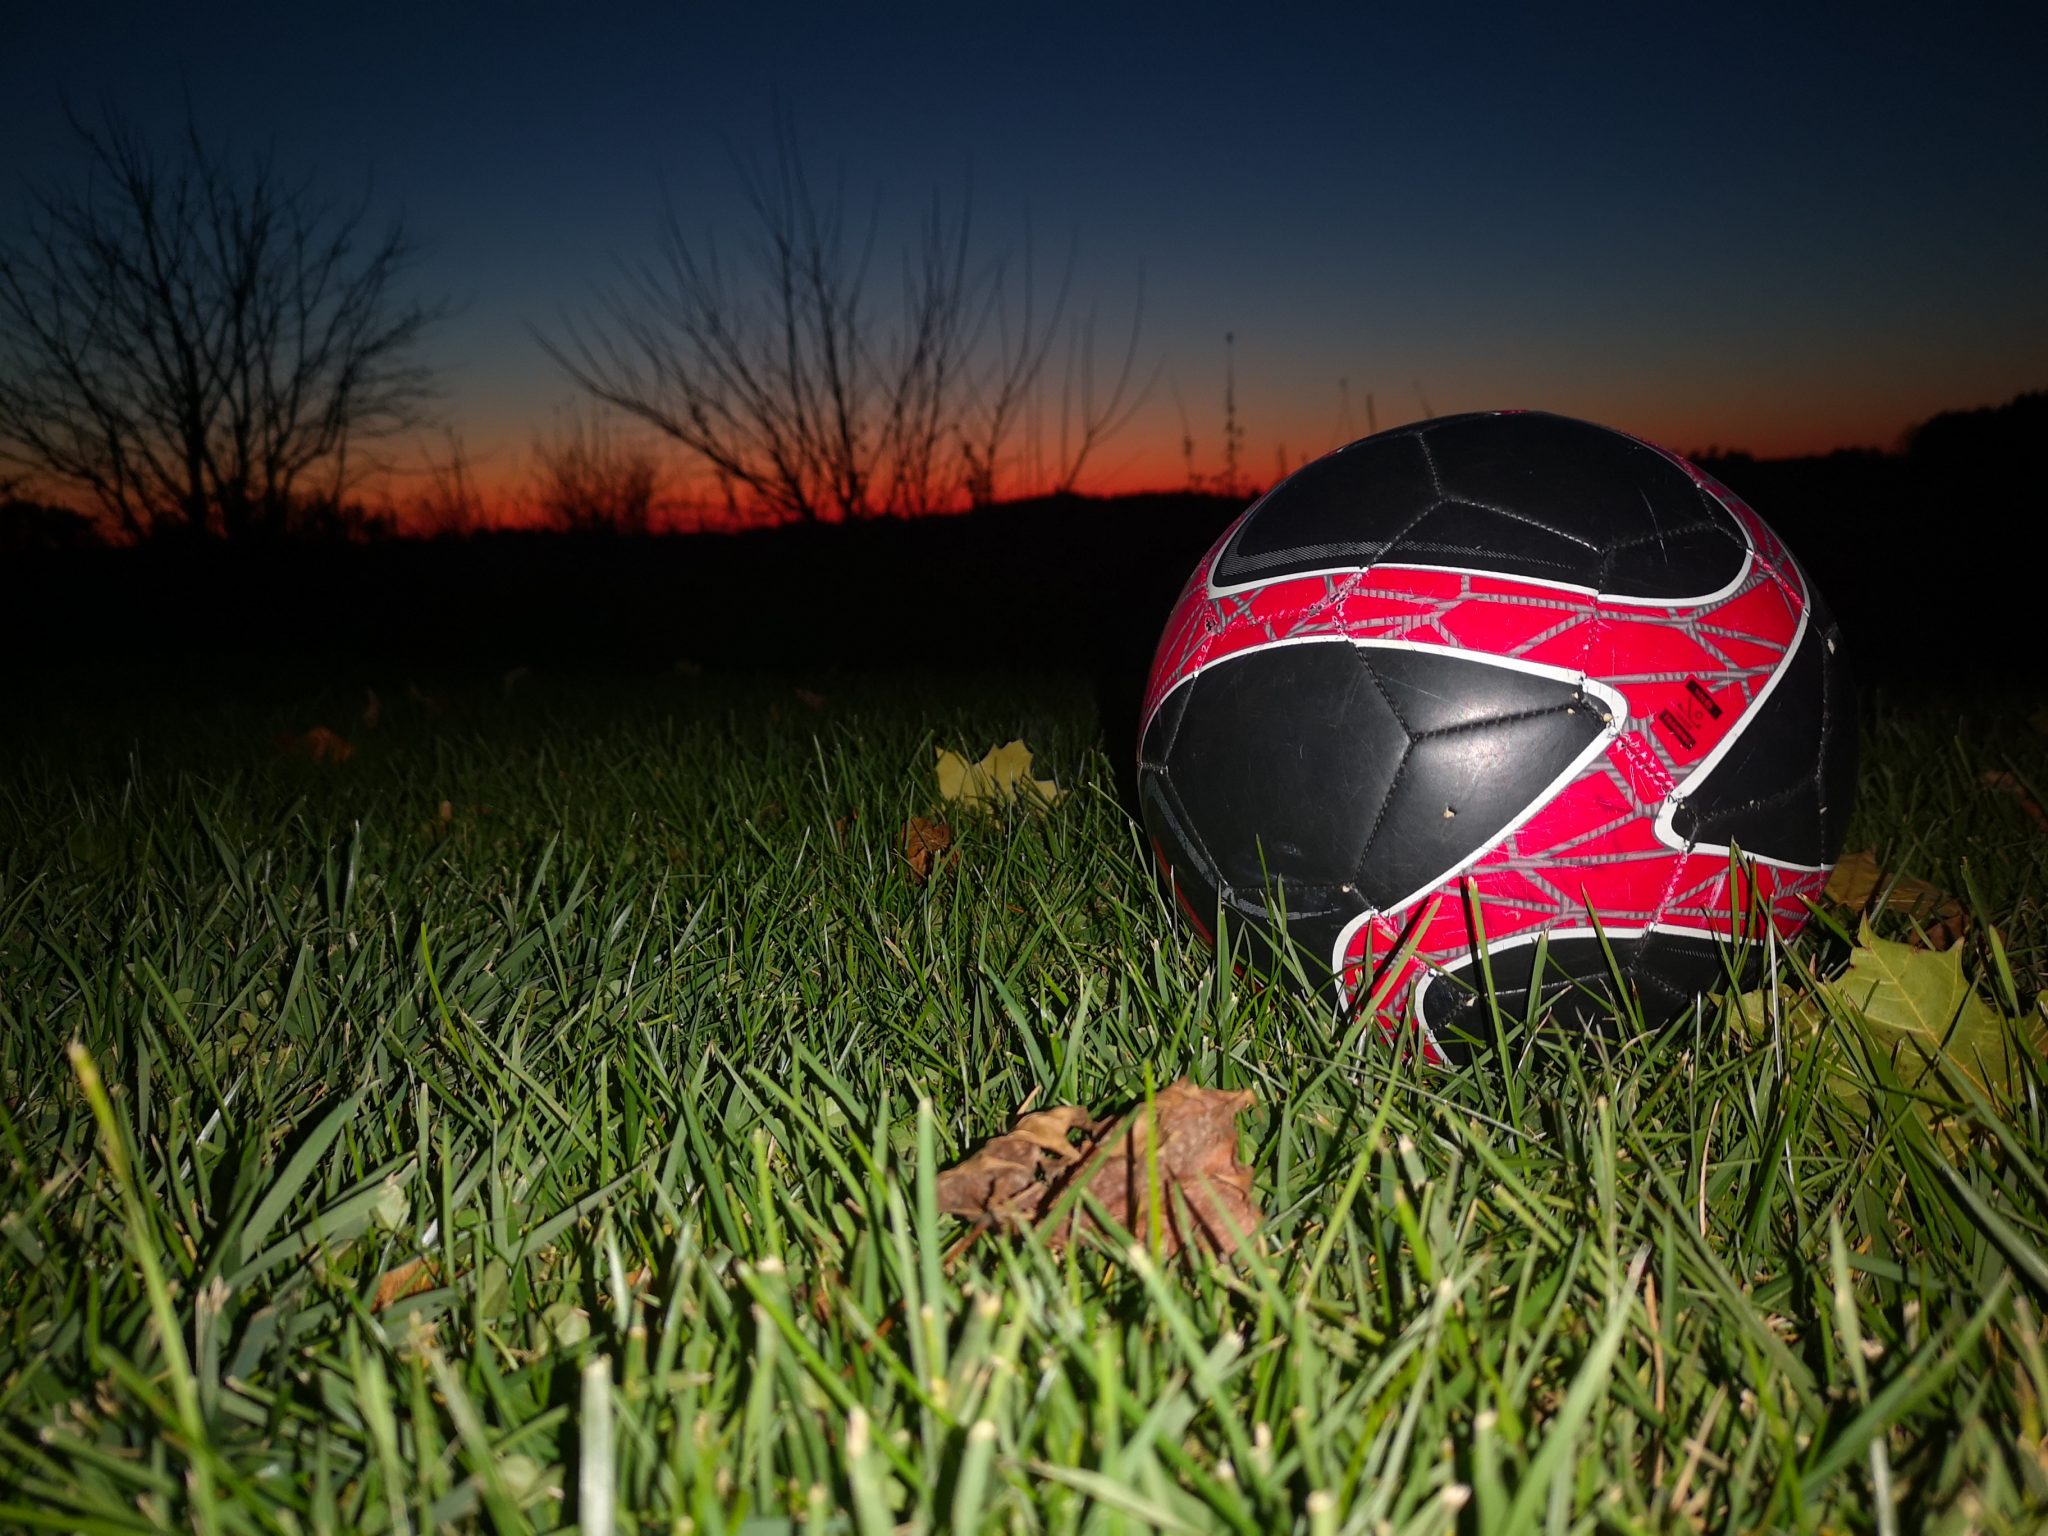 Black and red soccer ball in a field as the sun sets